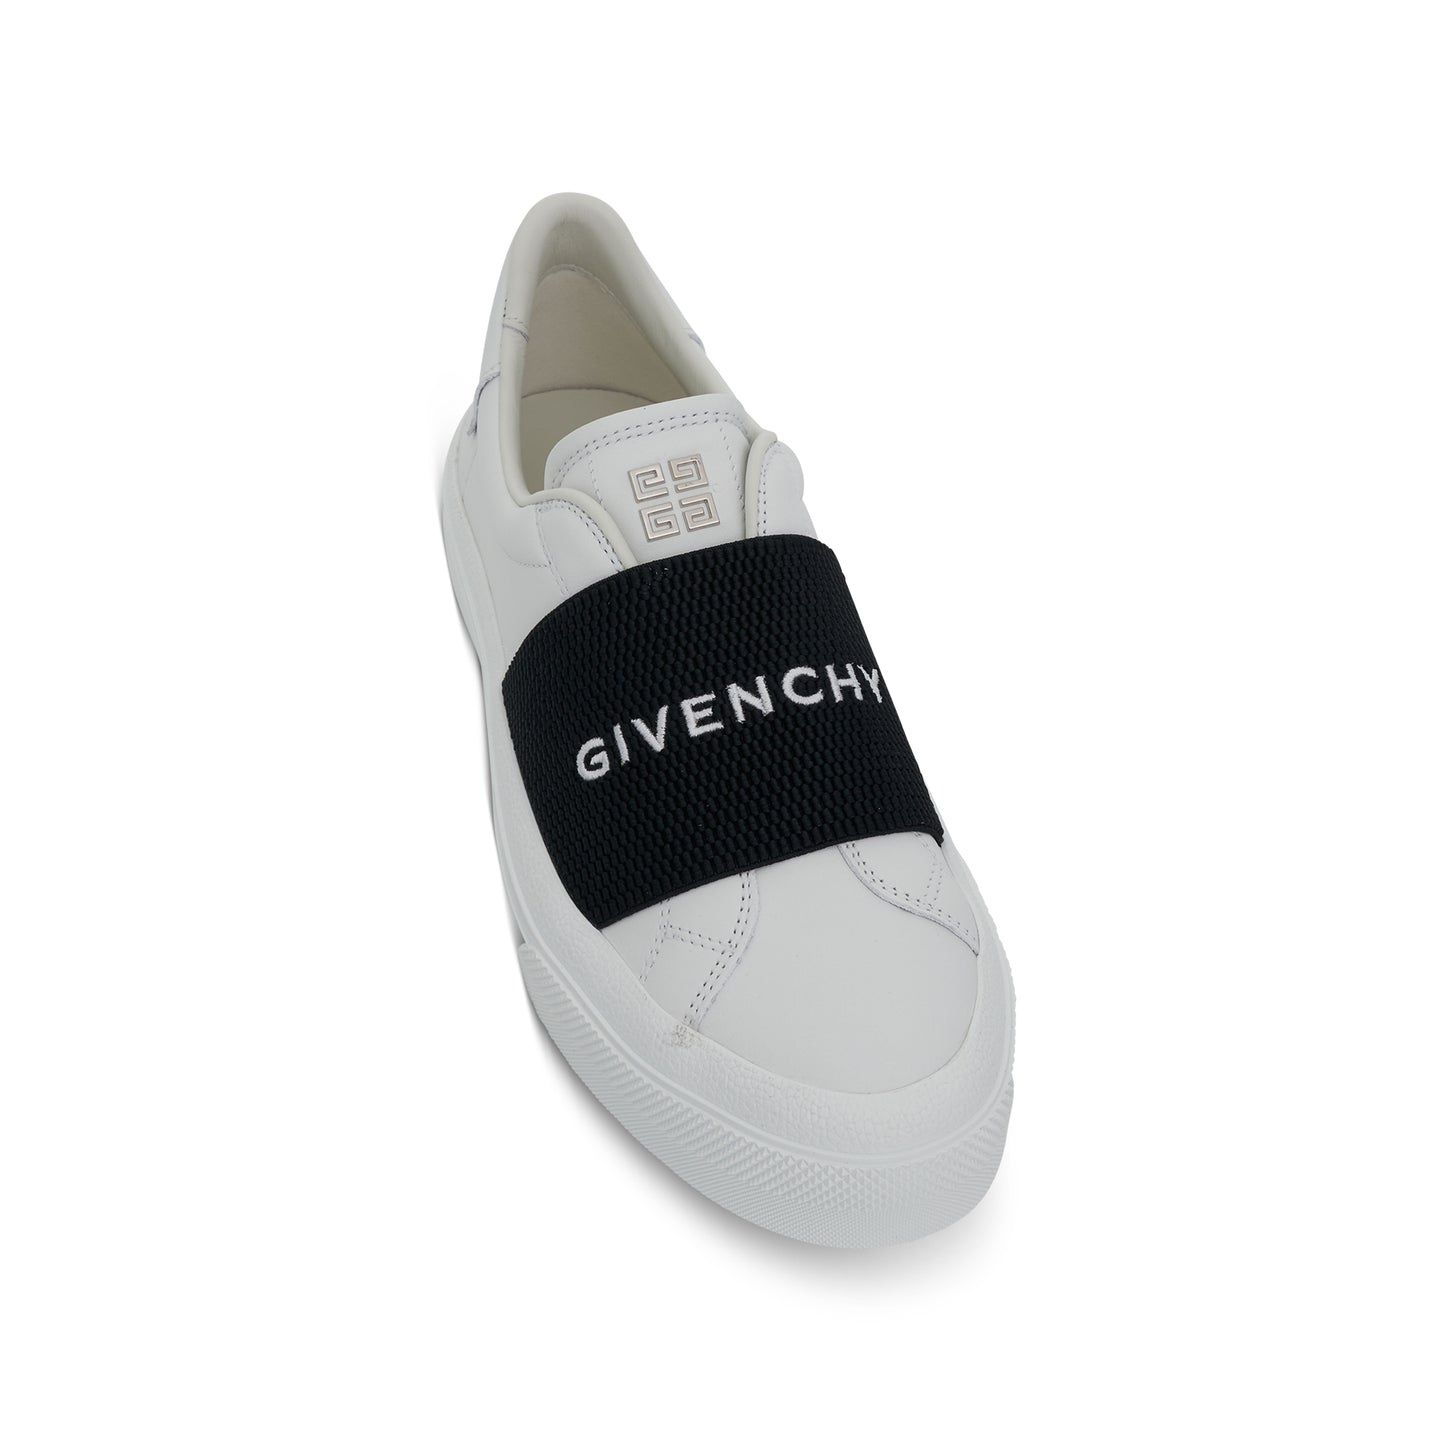 City Court Elastic Band Sneakers in White/Black